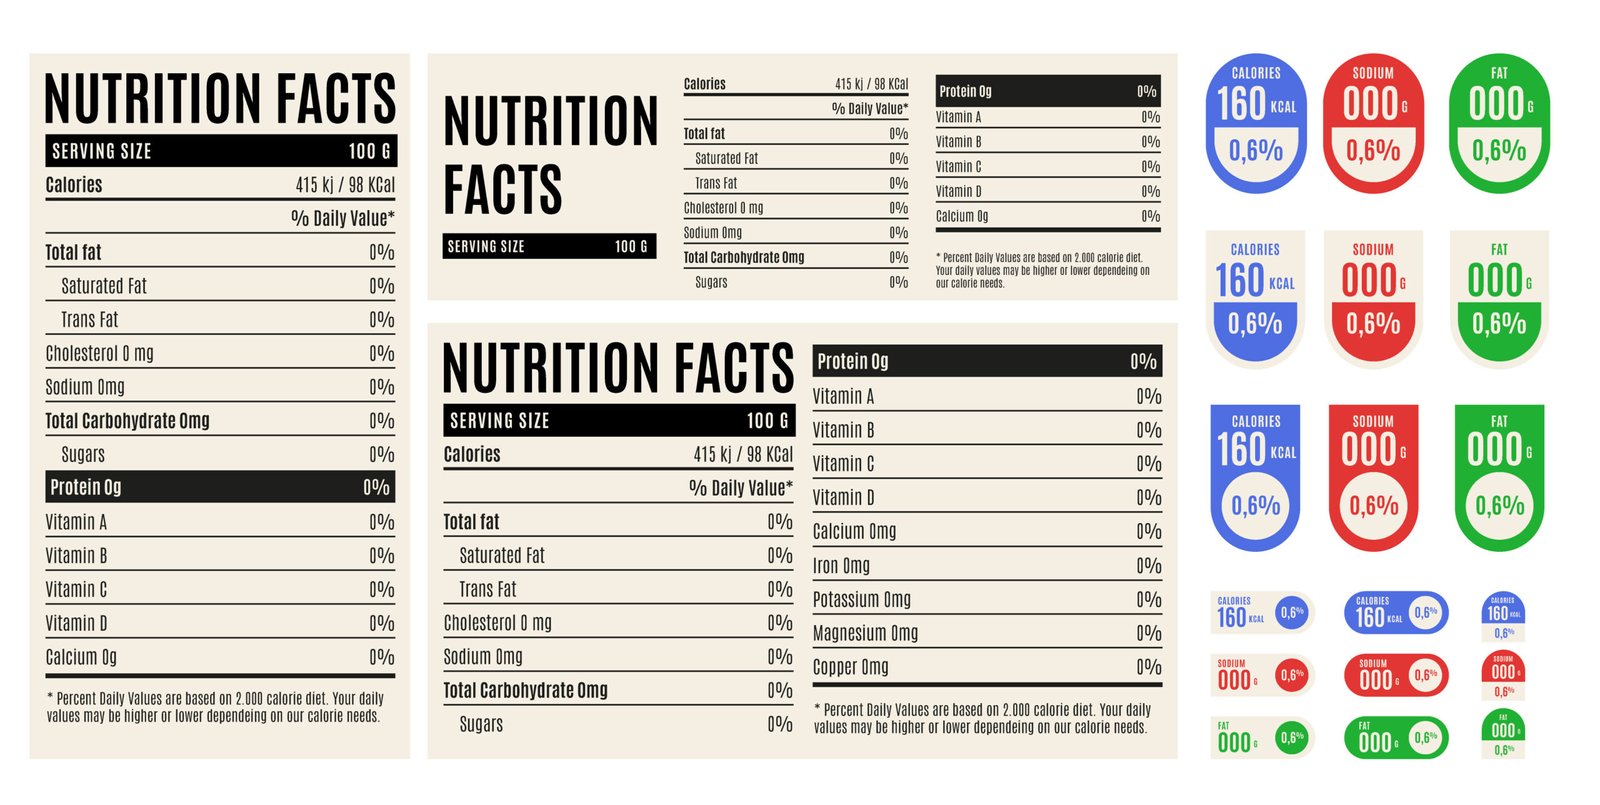 How Are Ingredients Listed On Food Labels?